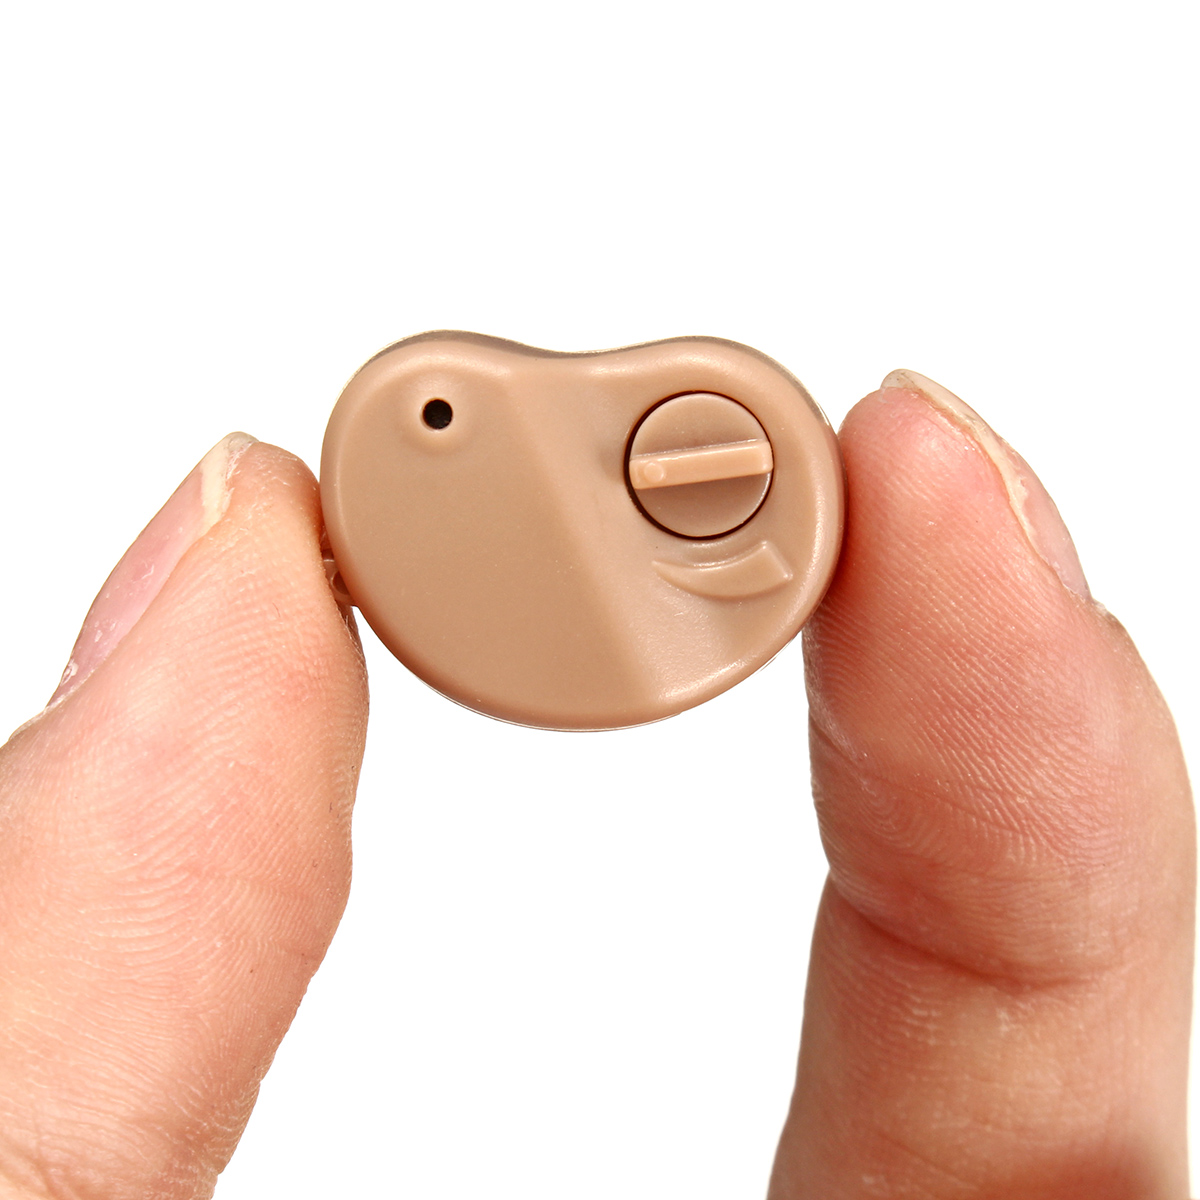 Adjustable Digital Hearing Aids Mini In-Ear Best Sound Voice Amplifier Invisible 16